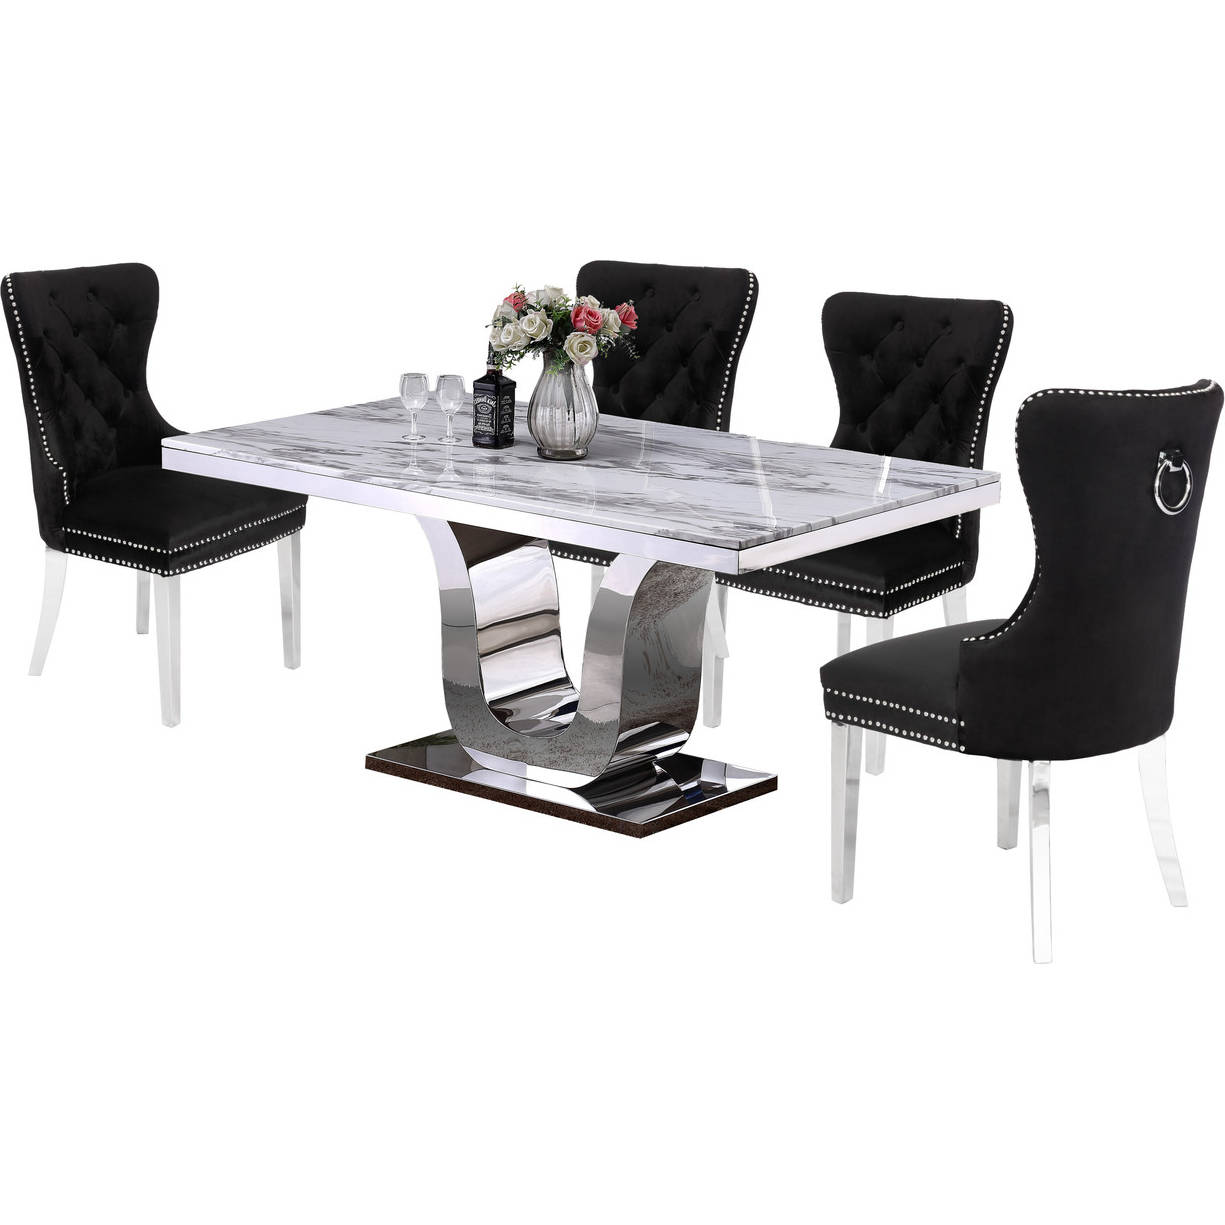 Best Quality D14-4SC47 D14 5 Piece Dining Set in White Marble